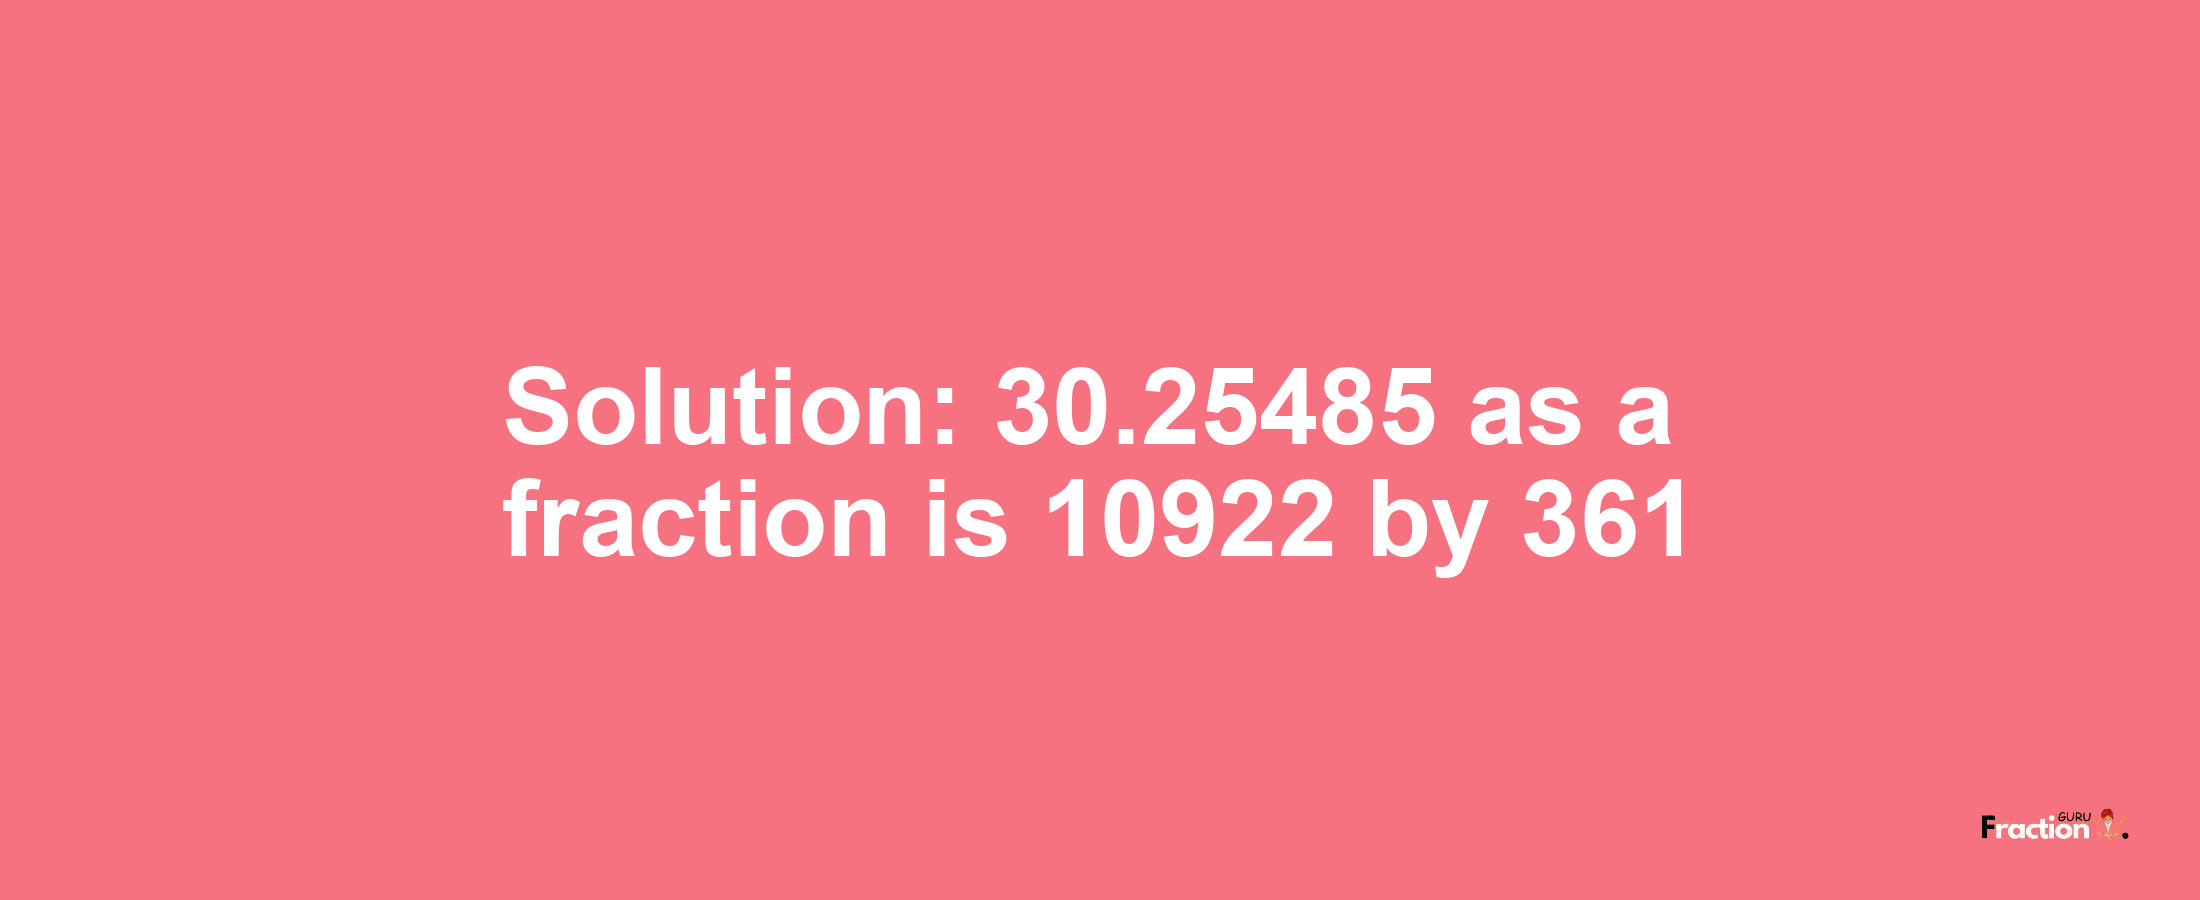 Solution:30.25485 as a fraction is 10922/361